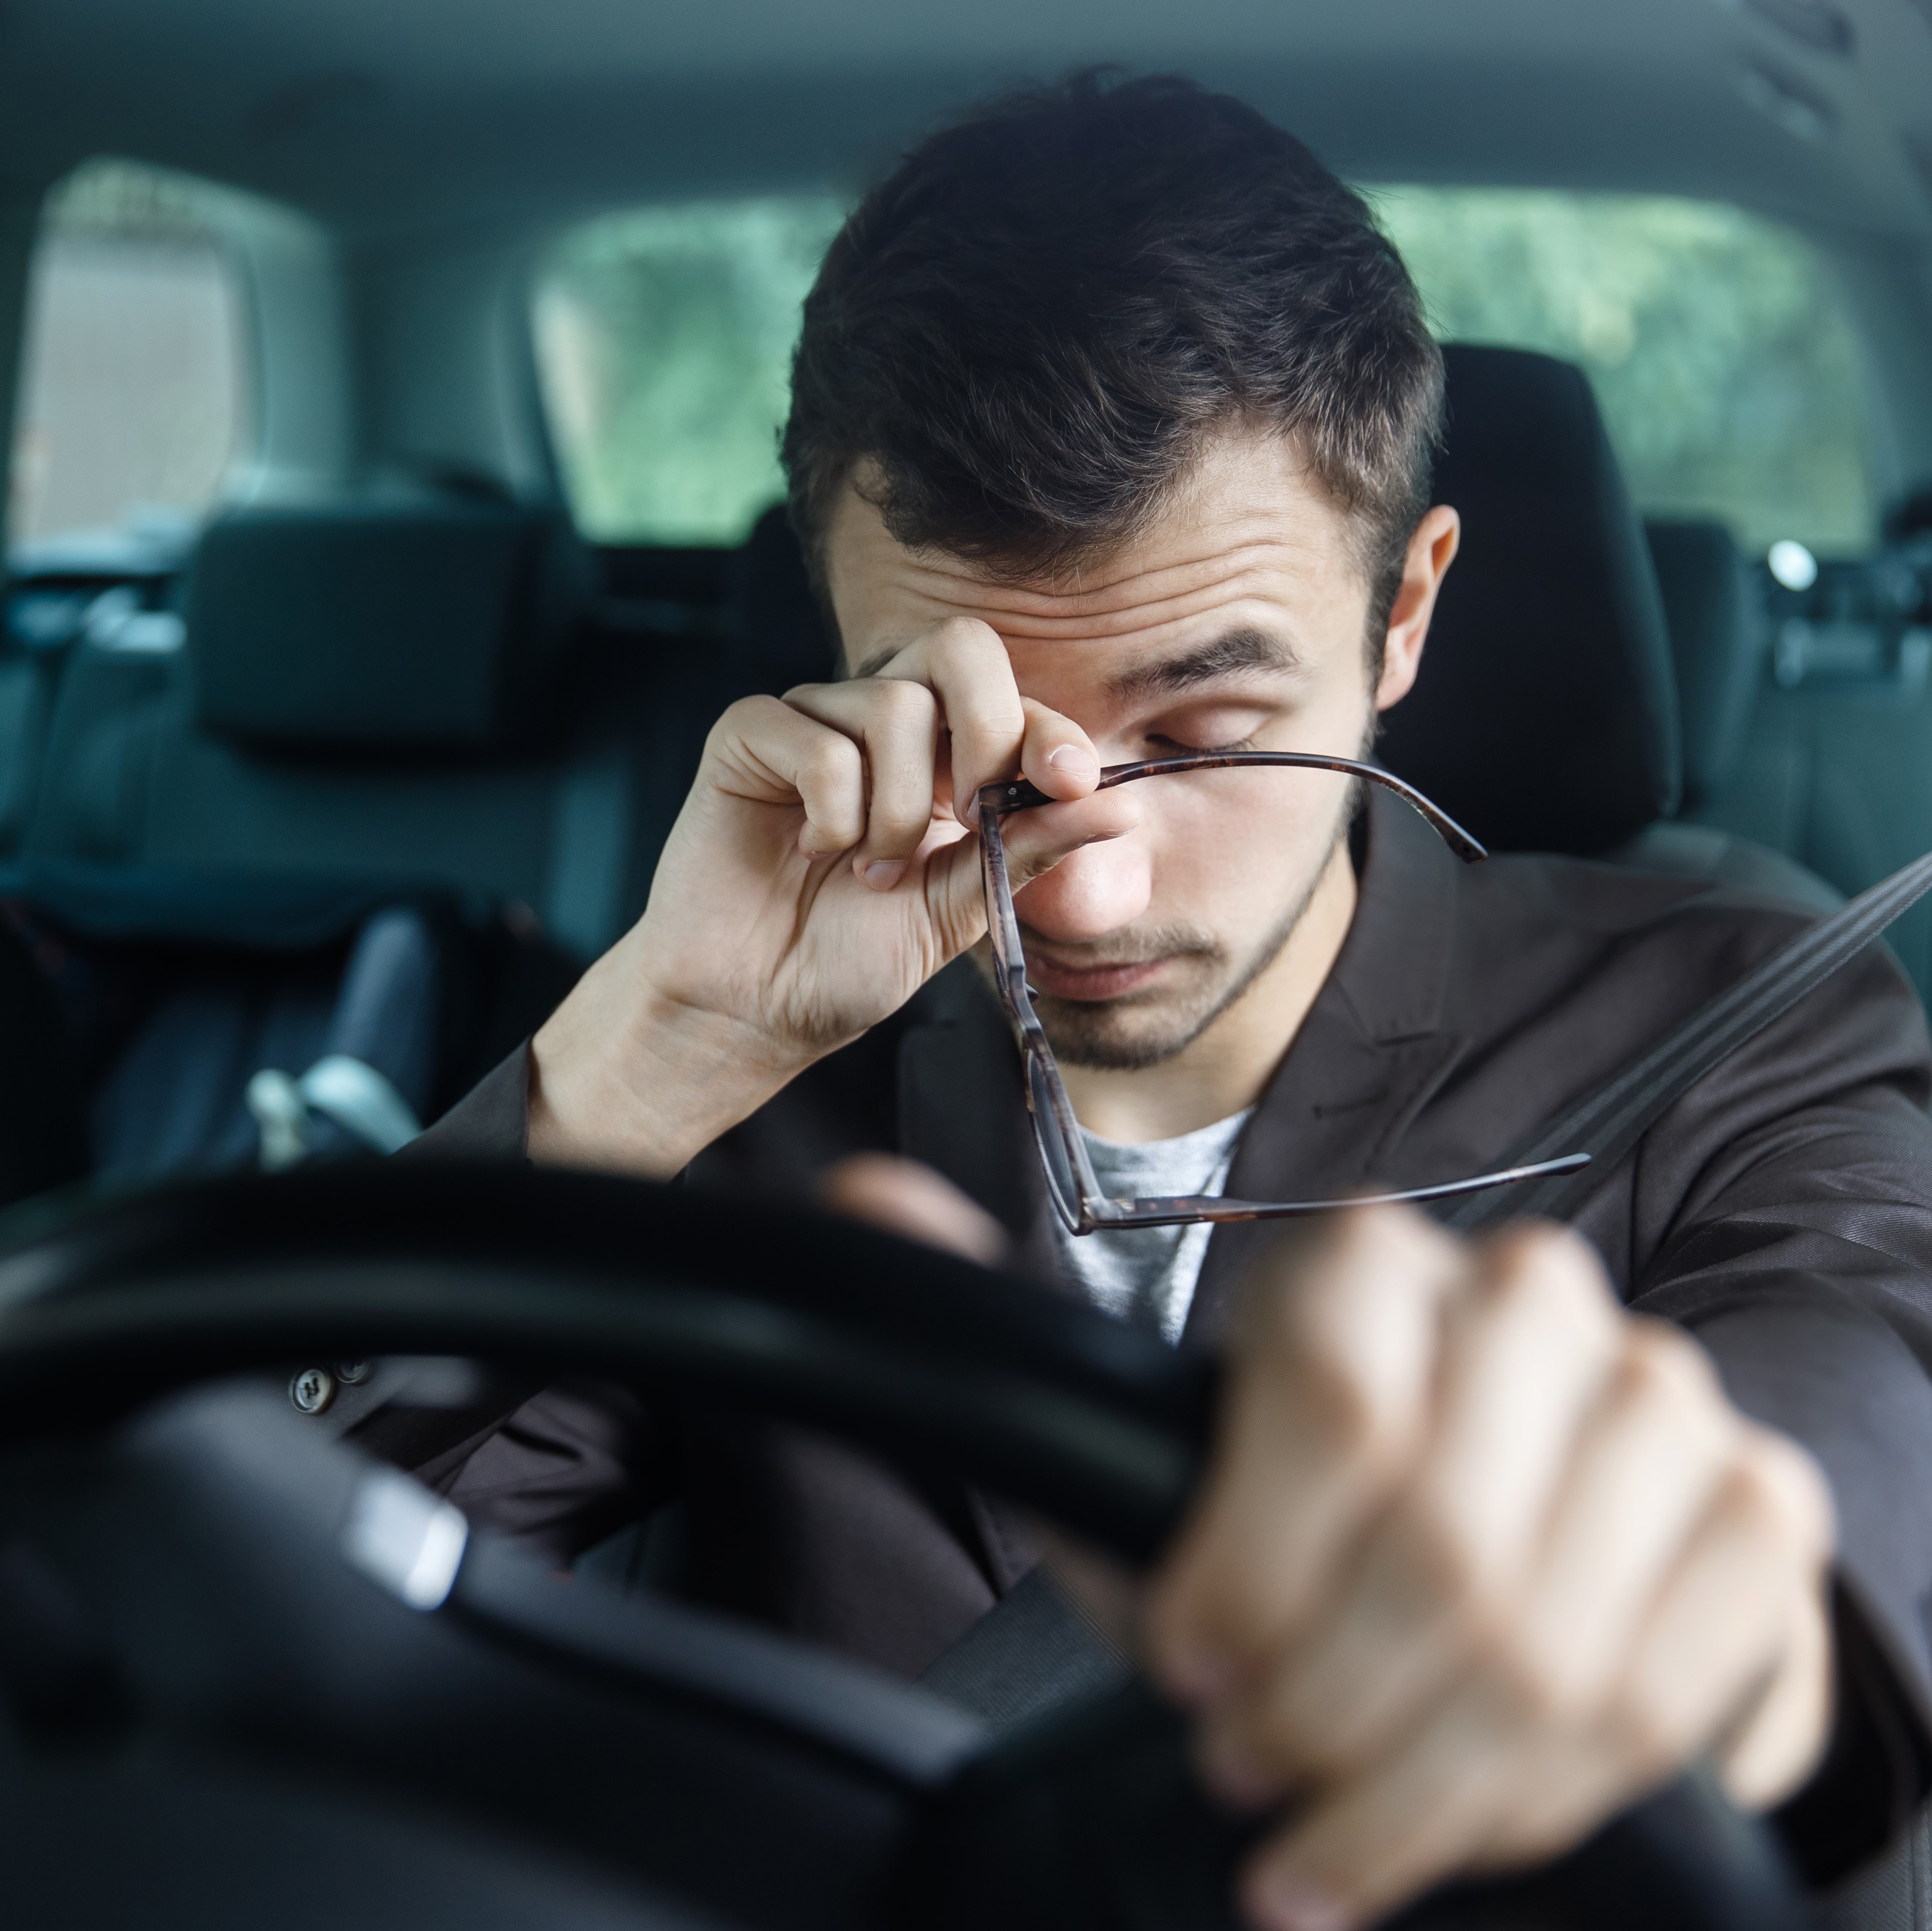 New AAA Research Shows Drowsy Drivers Often Fail to Take Breaks 